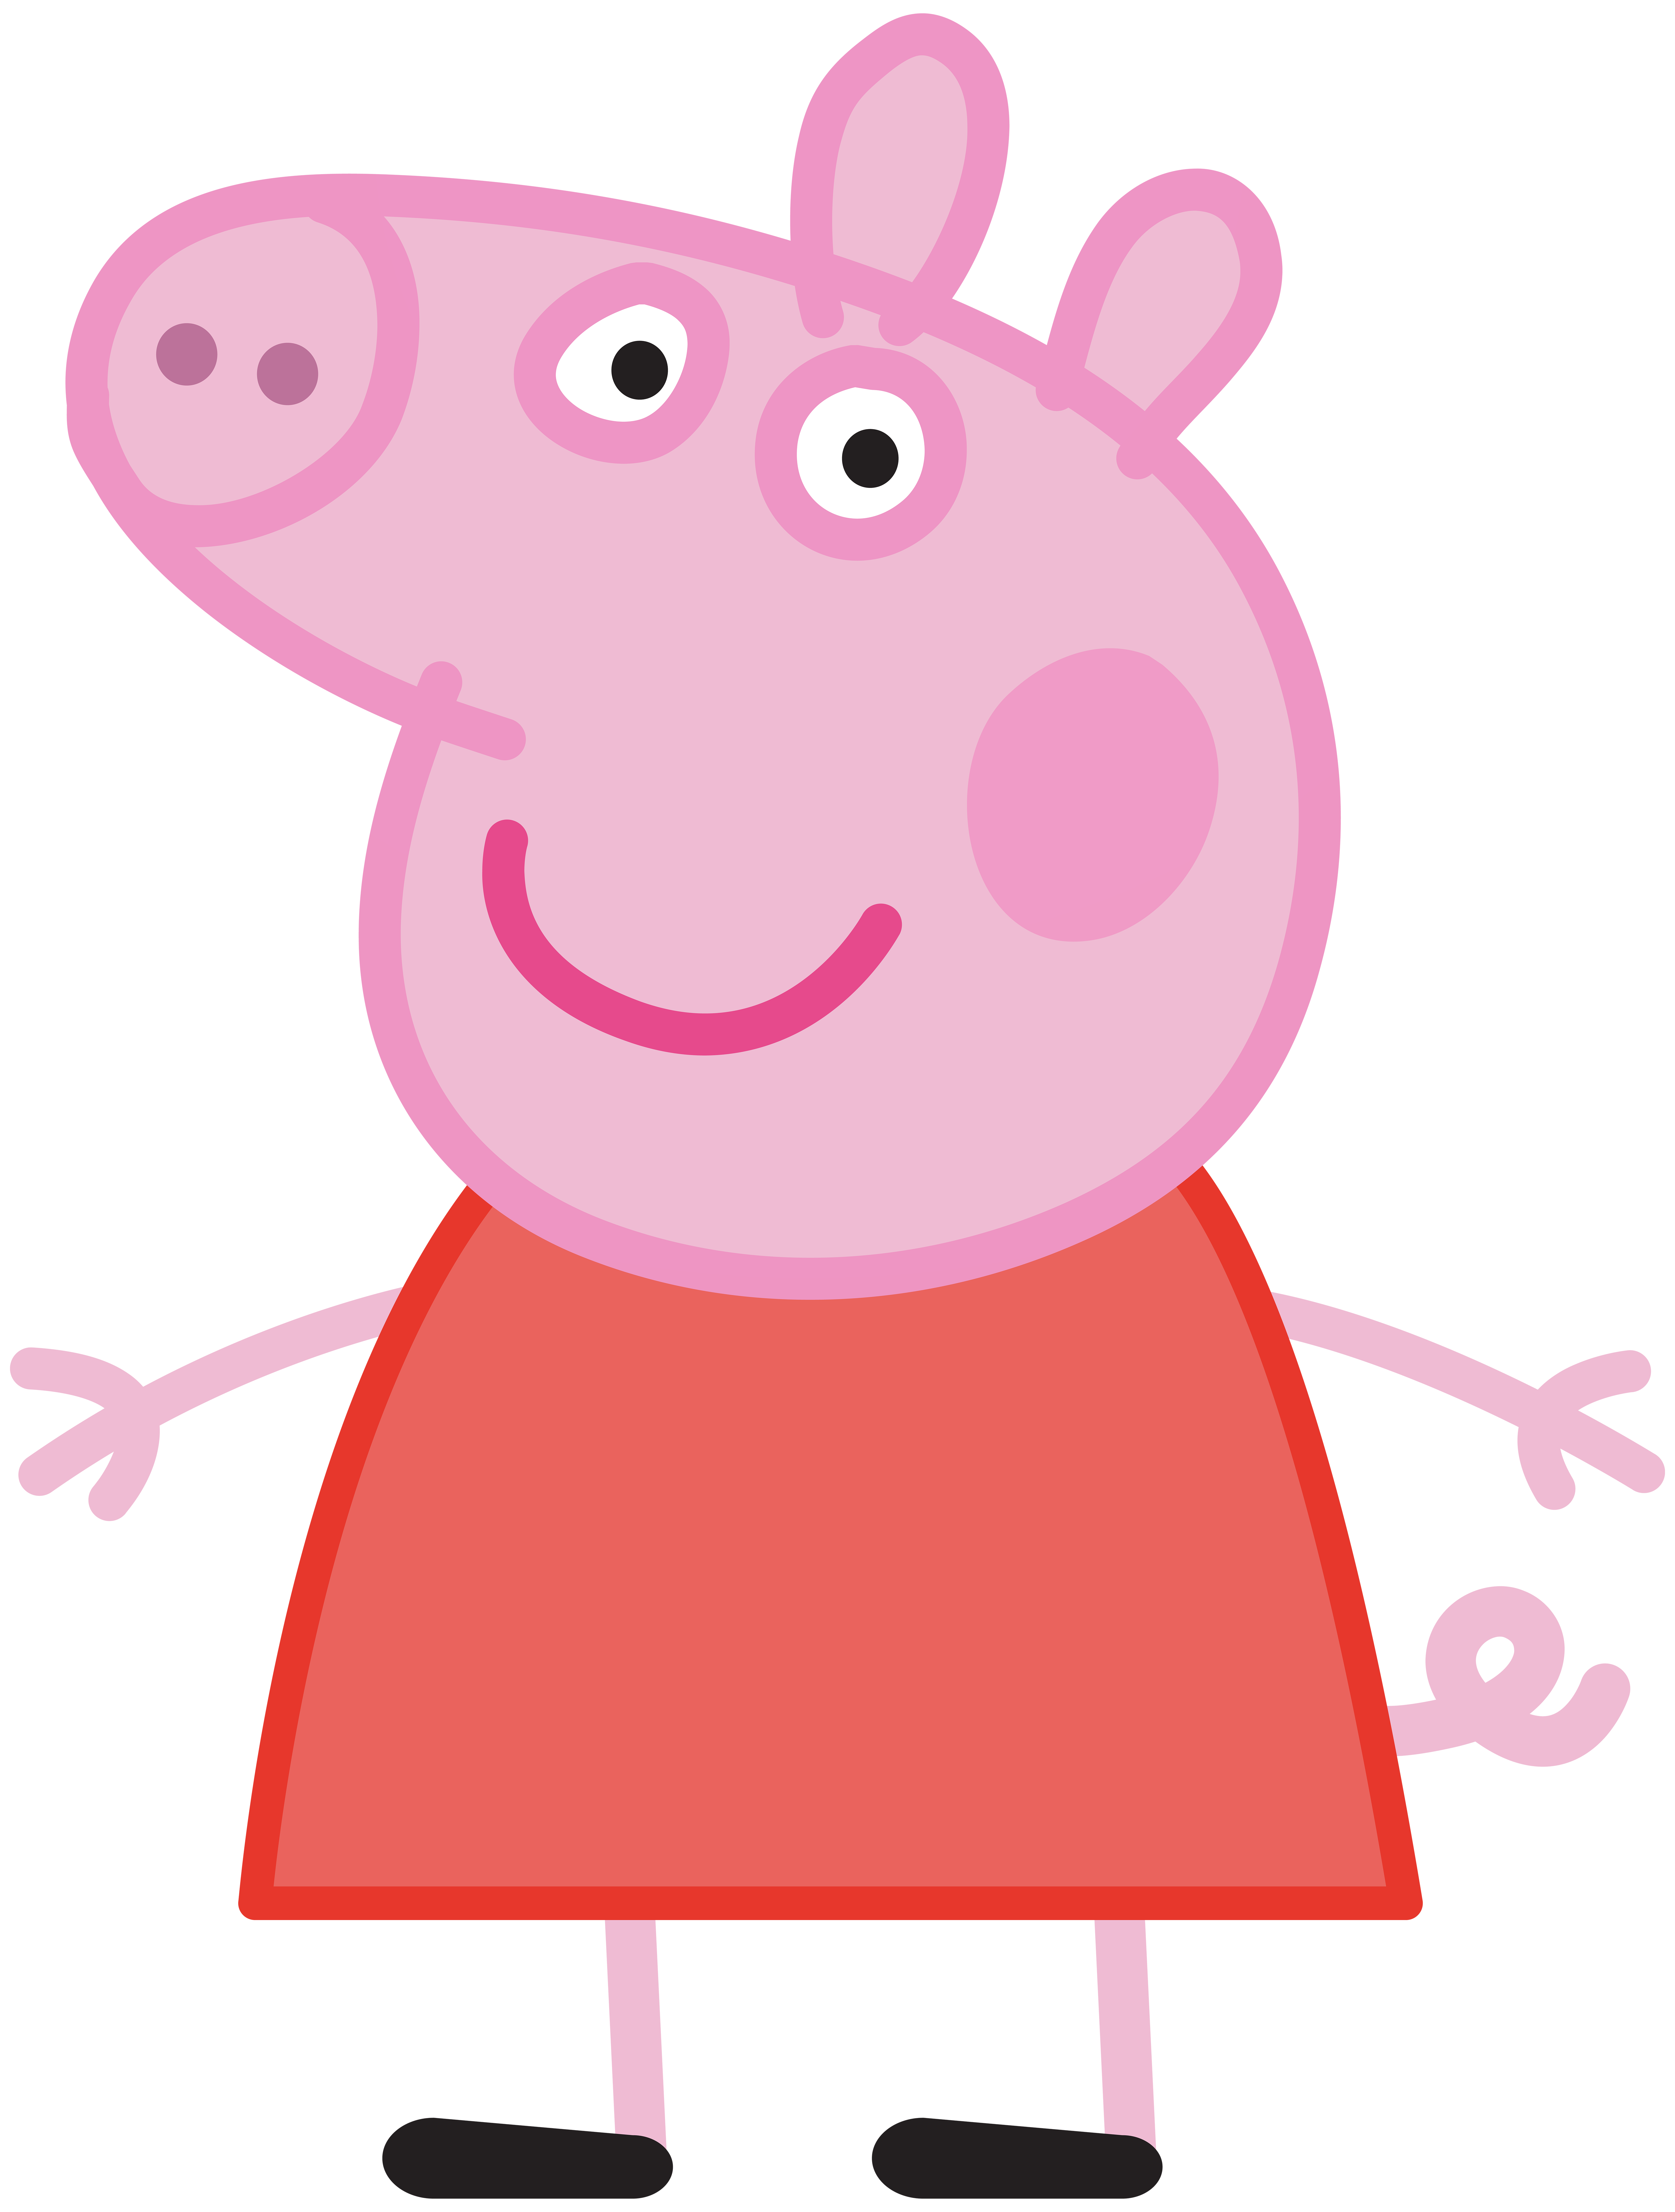 Peppa Pig Transparent PNG Image Quality Image And Transparent PNG Free Clipart